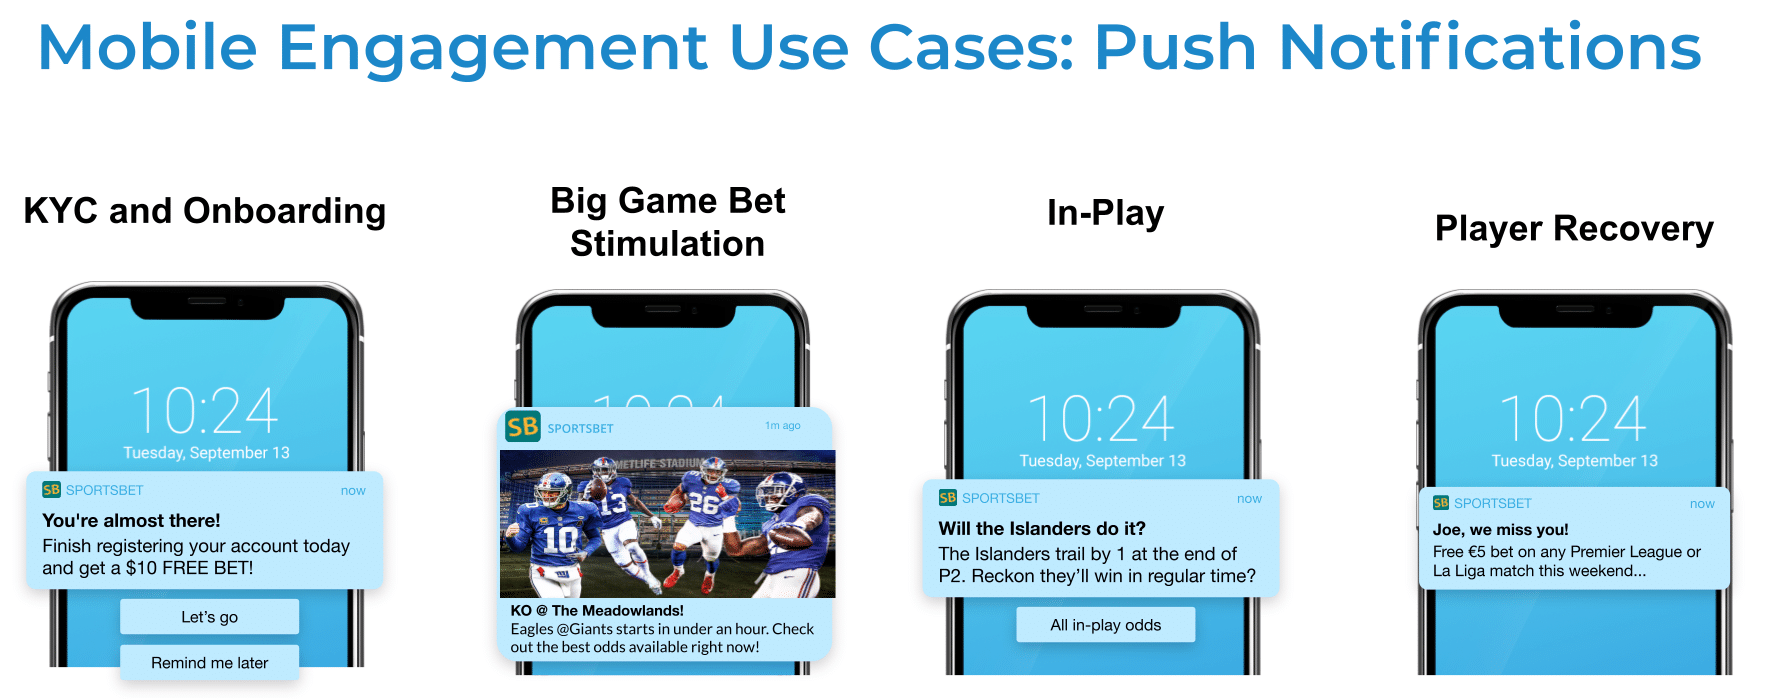 Using push notifications to engage mobile players